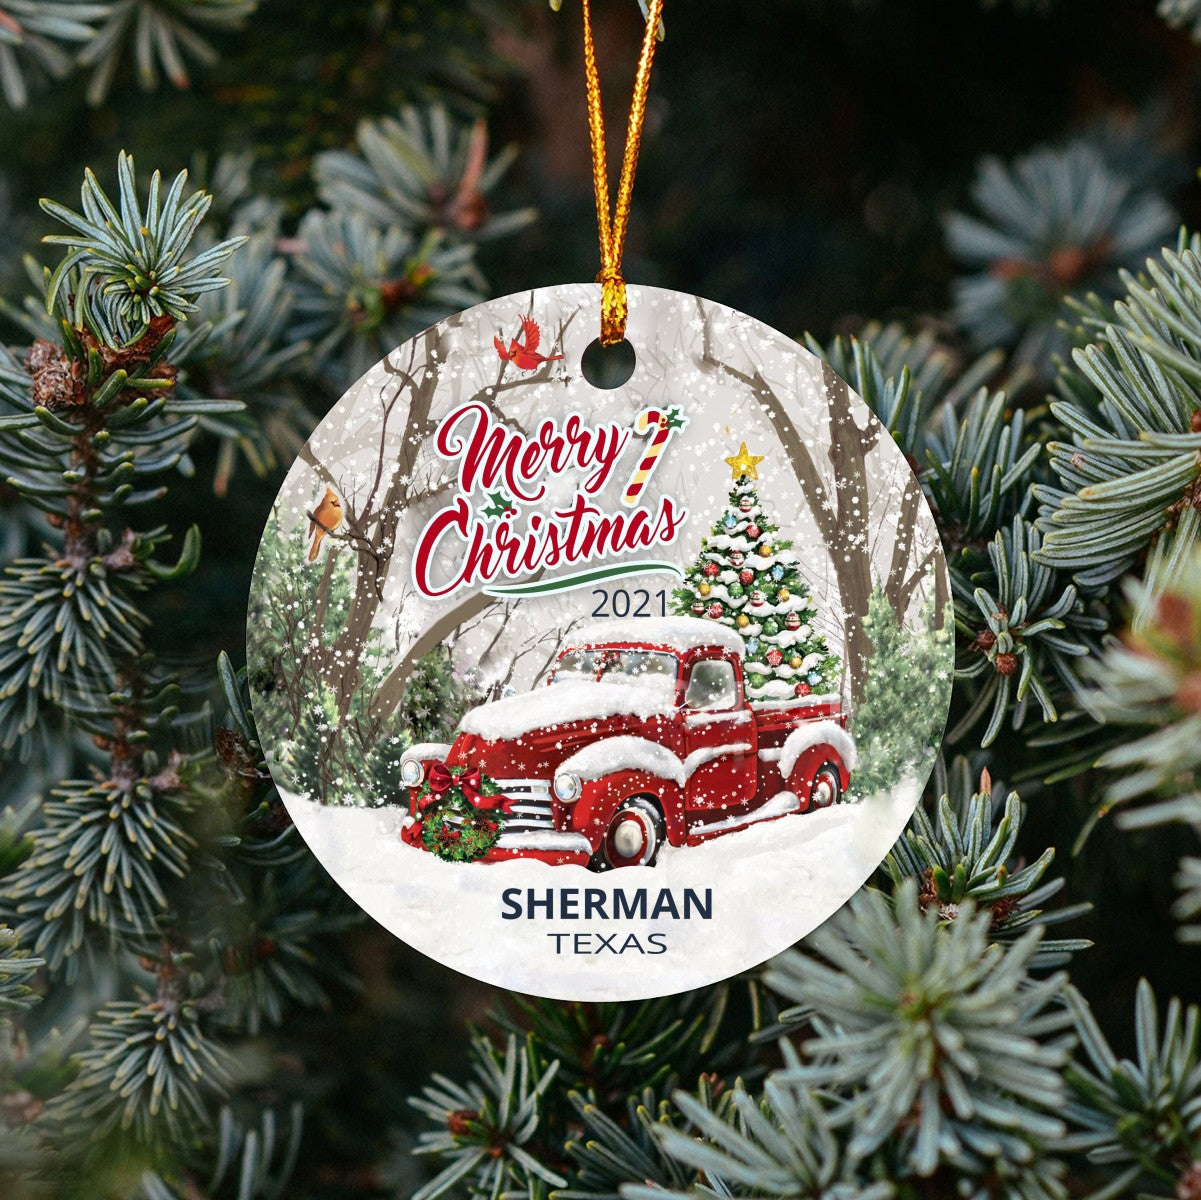 Christmas Tree Ornaments Sherman - Ornament Customize With Name City And State Sherman Texas TX - Red Truck Xmas Ornaments 3'' Plastic Gift For Family, Friend And Housewarming